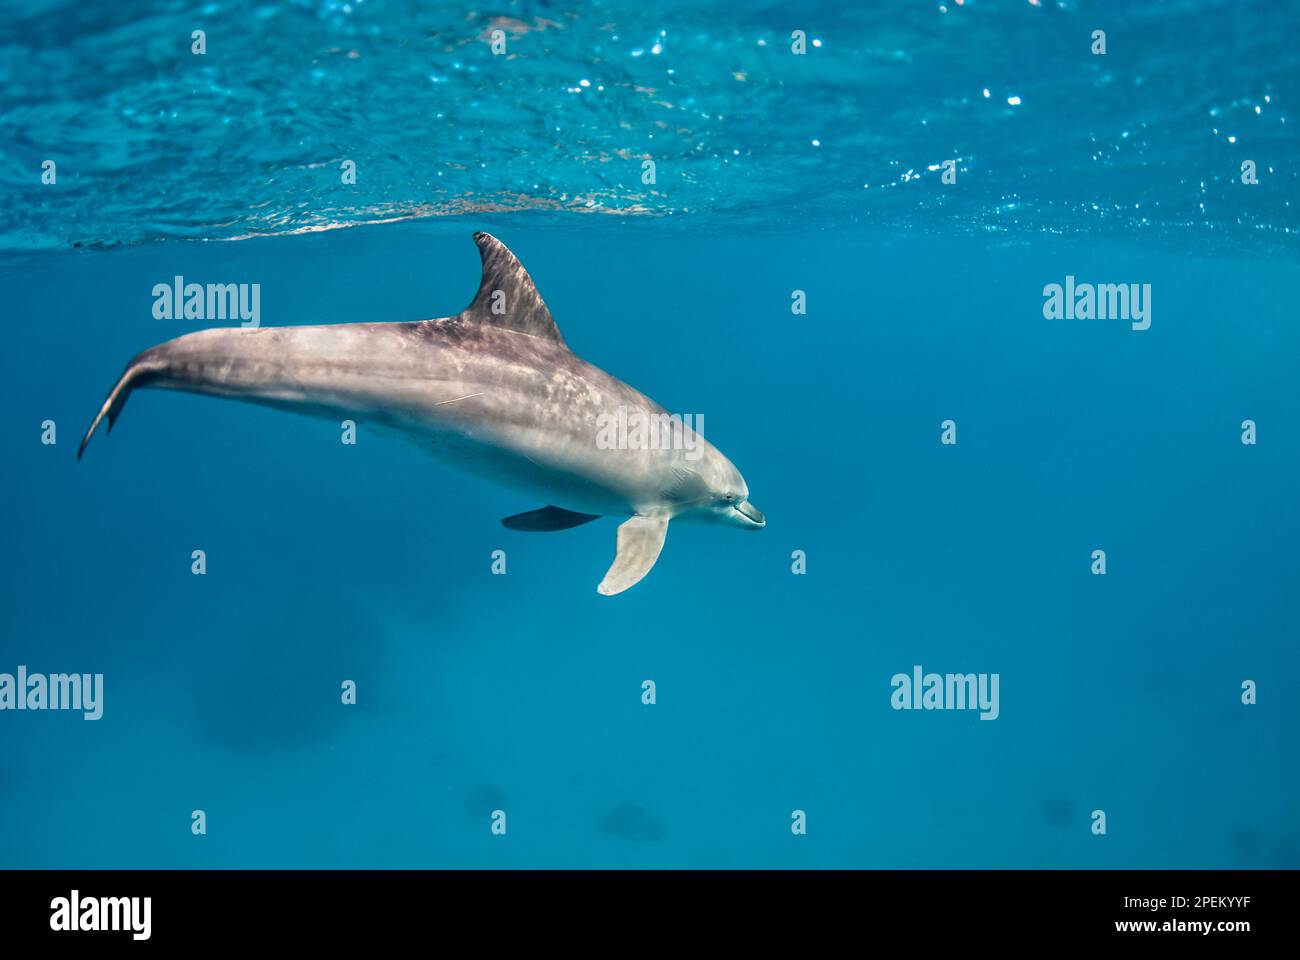 A dolphin (tursiops aduncus) swims under the surface of the ocean Stock Photo